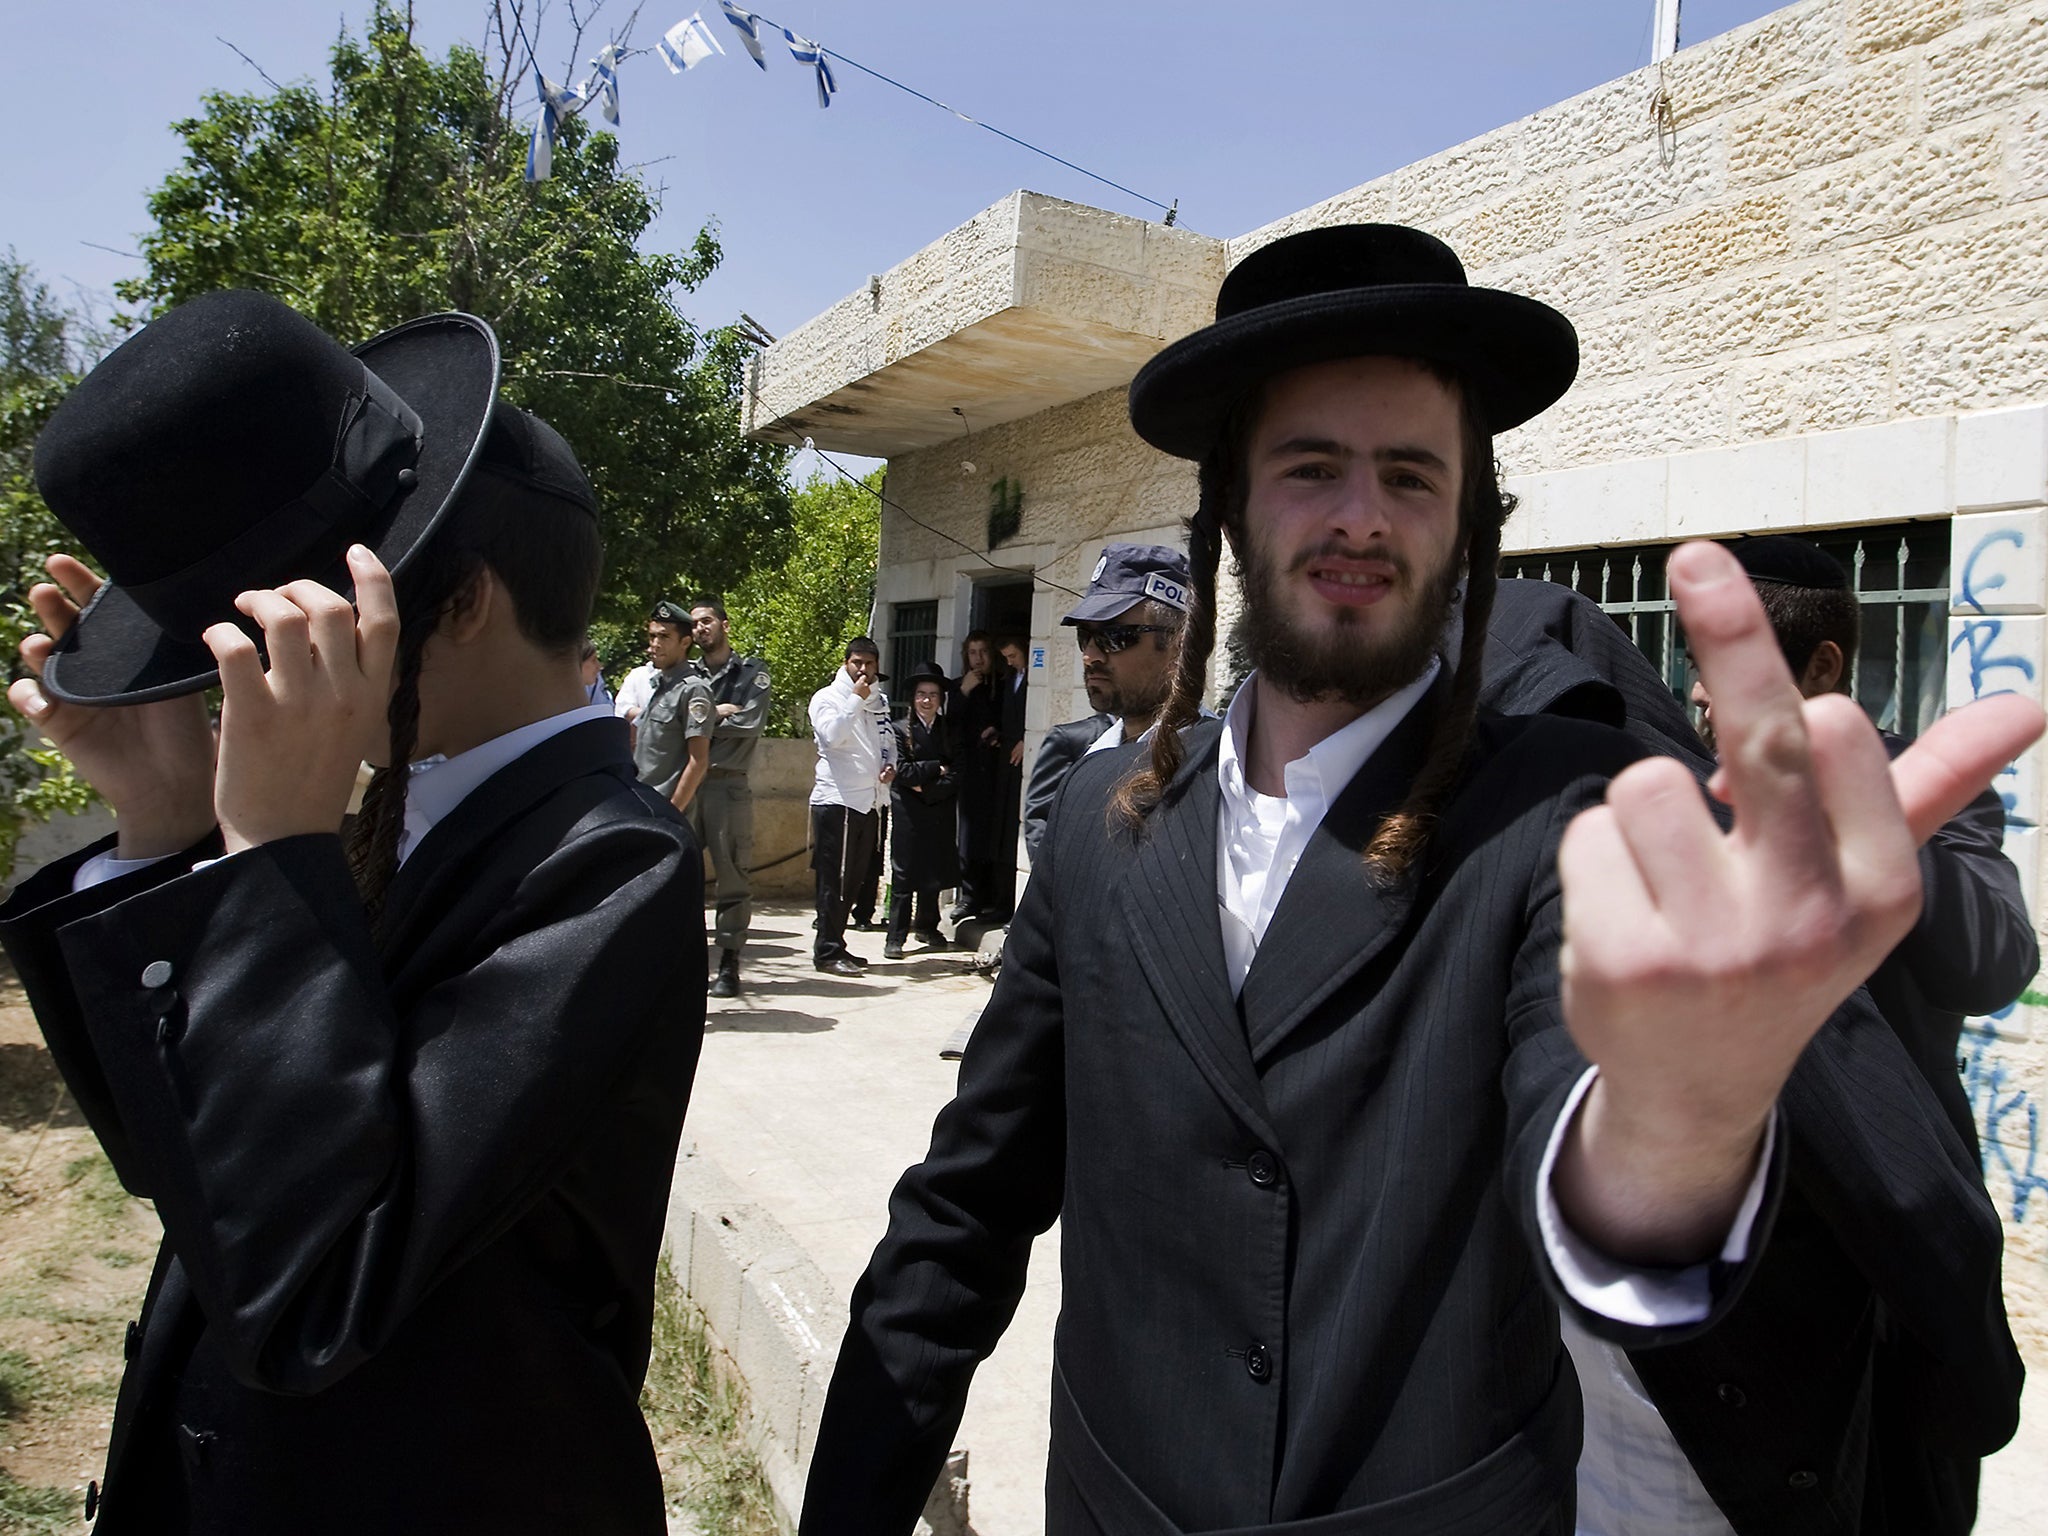 An Ultra-Orthodox Jewish man gestures as he stands outside the house of the Palestinian Kurd family who were evicted by Israeli settlers in east Jerusalem’s Arab quarter of Sheikh Jarrah